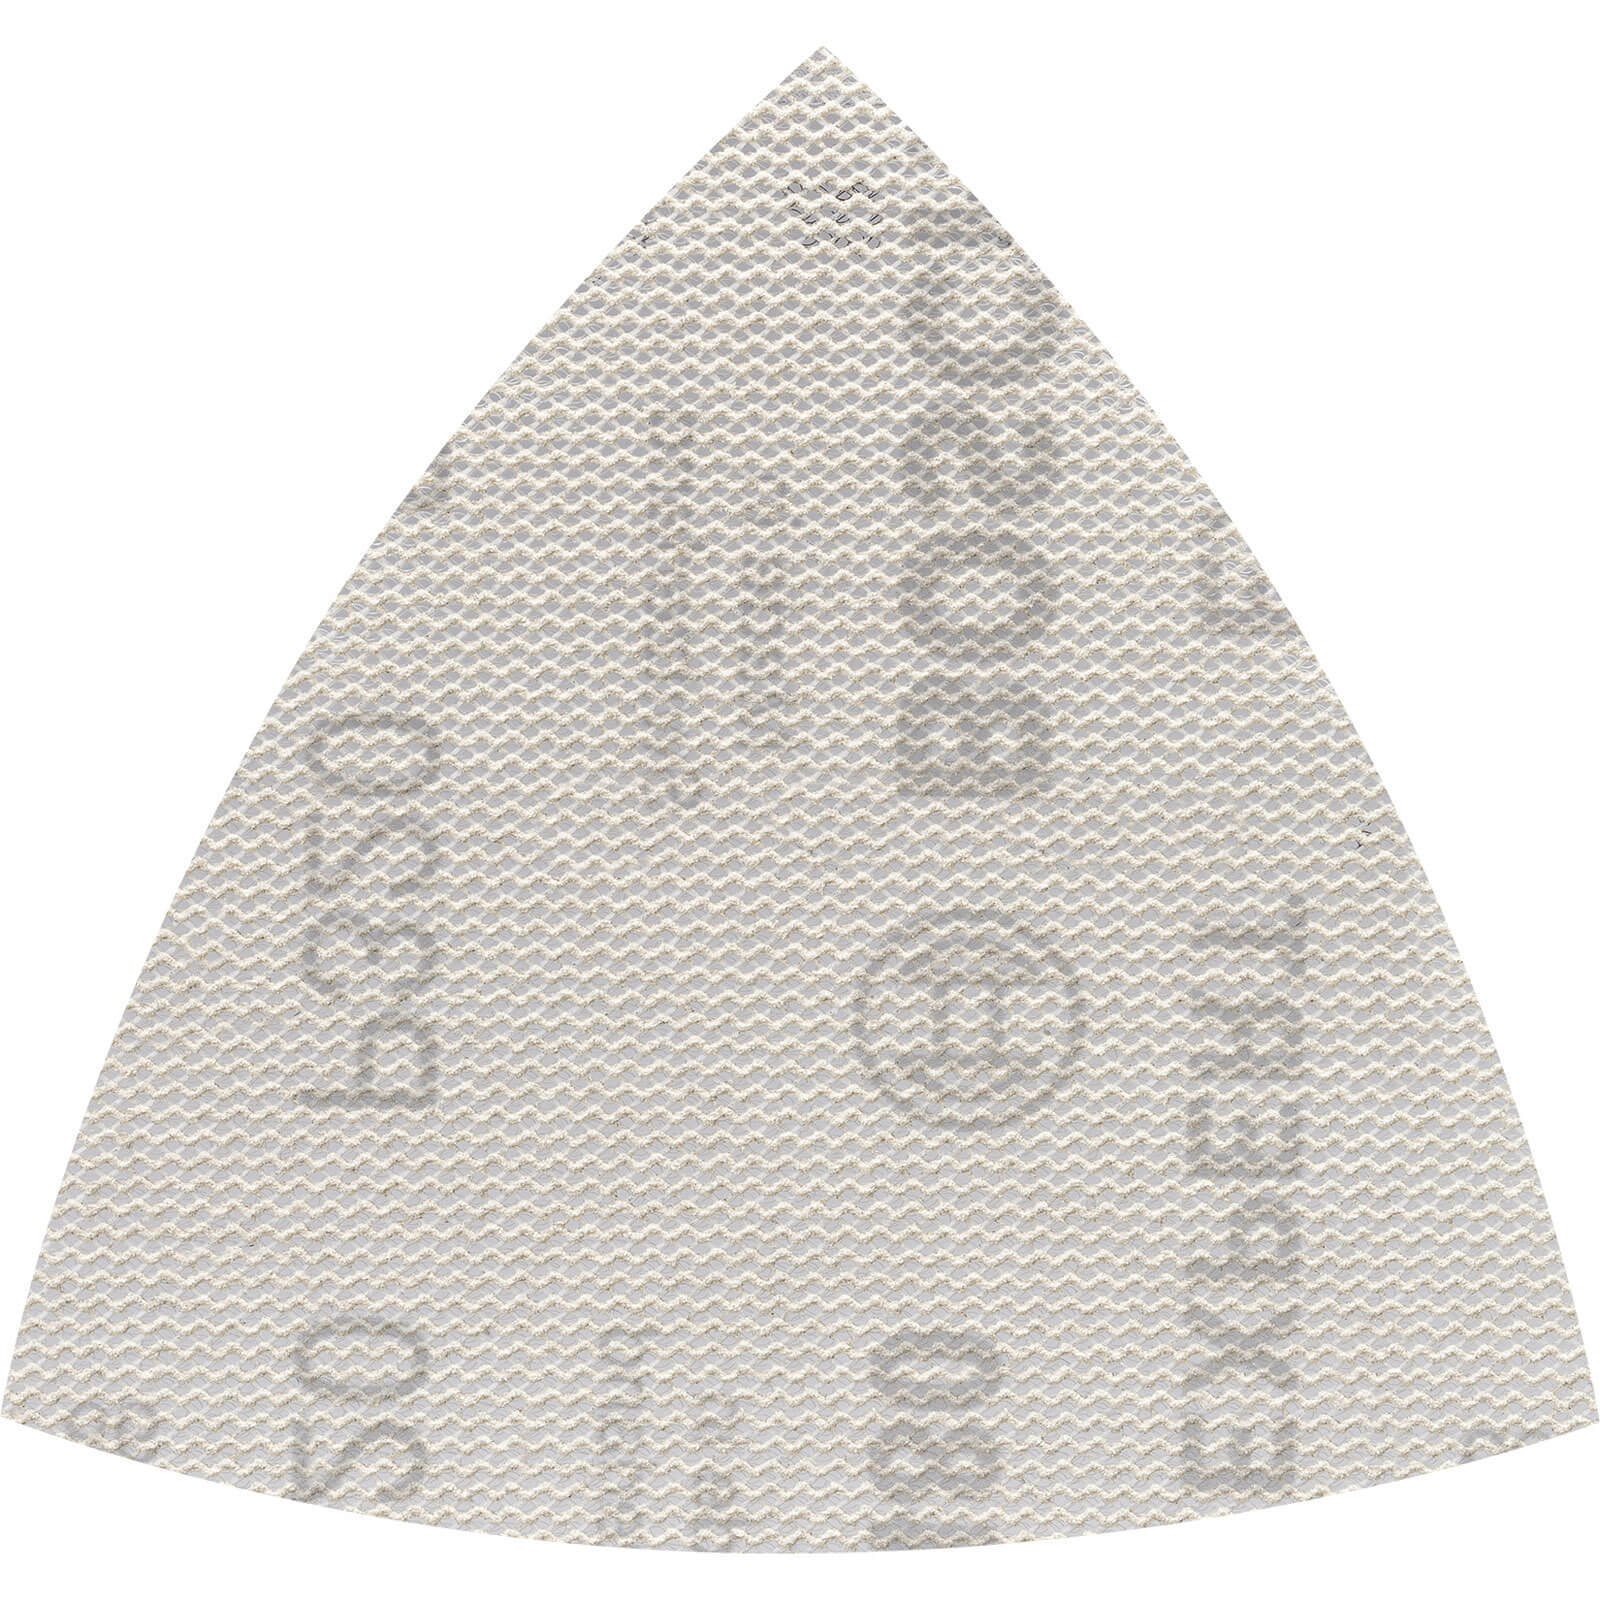 Image of Bosch Expert M480 Quick Fit Net Delta Sanding Sheets for Paint and Wood 93mm x 93mm 320g Pack of 5